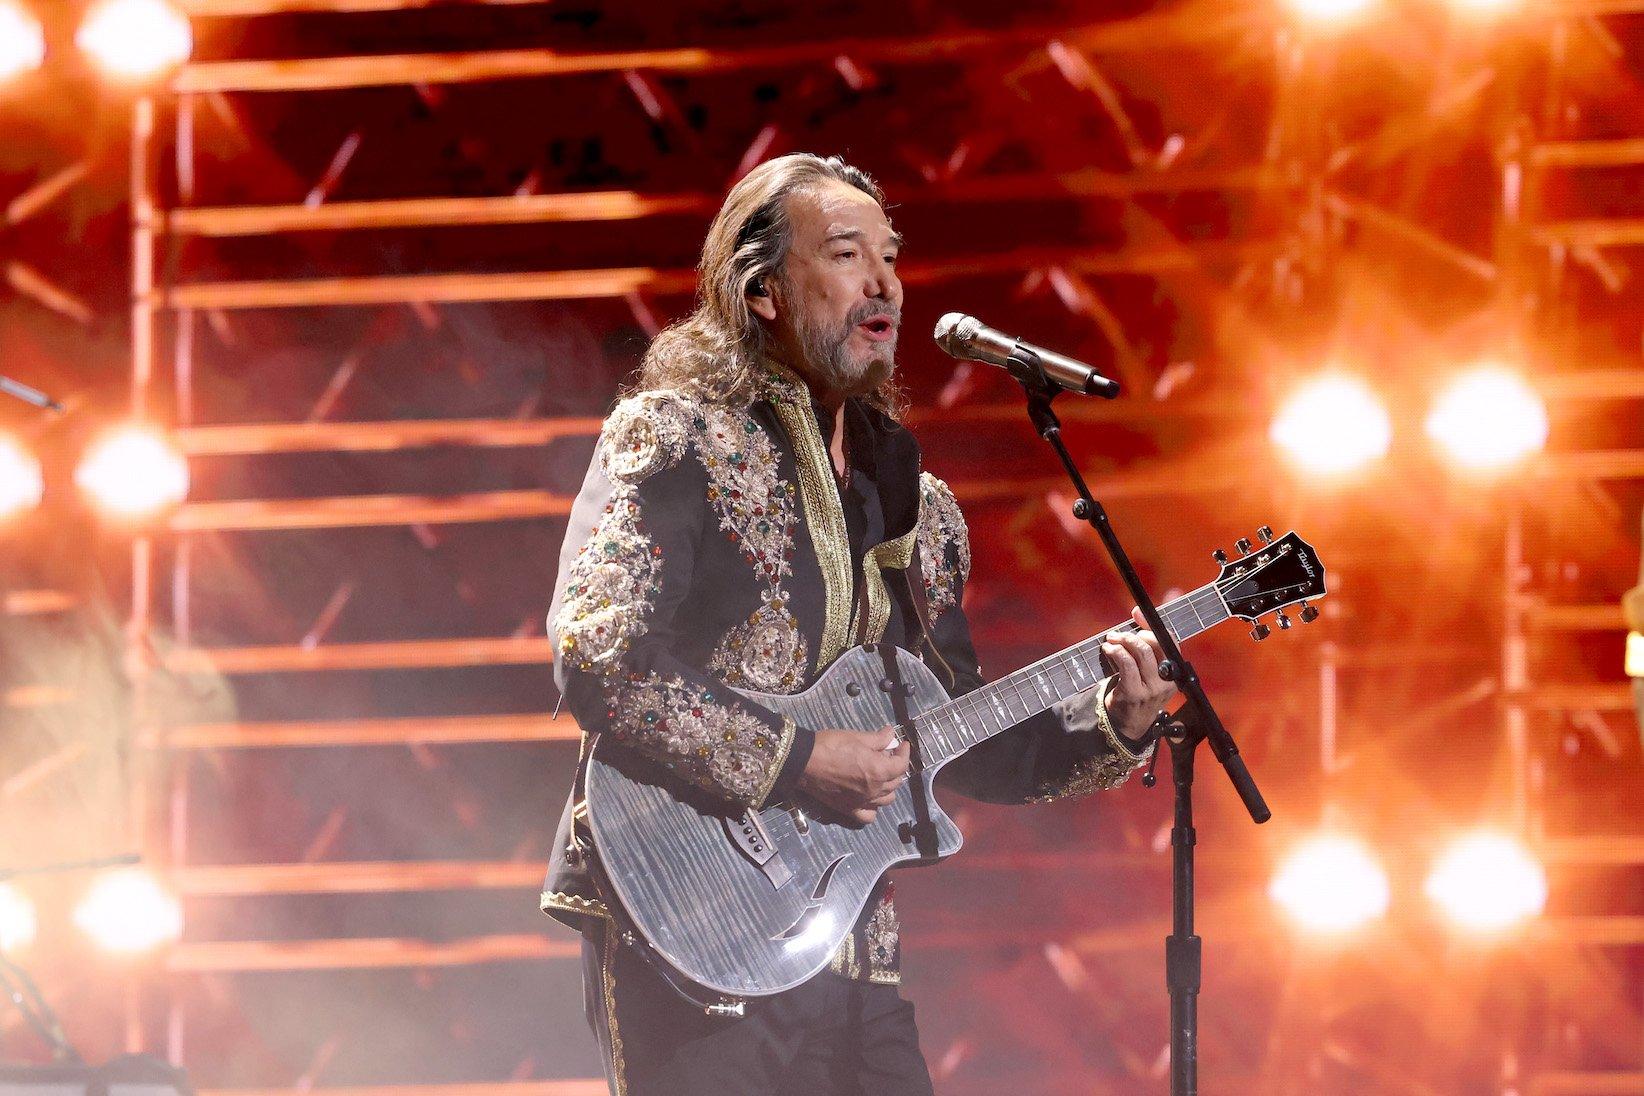 Photo of Marco Antonio Solís of Los Bukis performing onstage at the 2022 Latin GRAMMY Awards at Michelob ULTRA Arena on November 17, 2022, in Las Vegas, Nevada